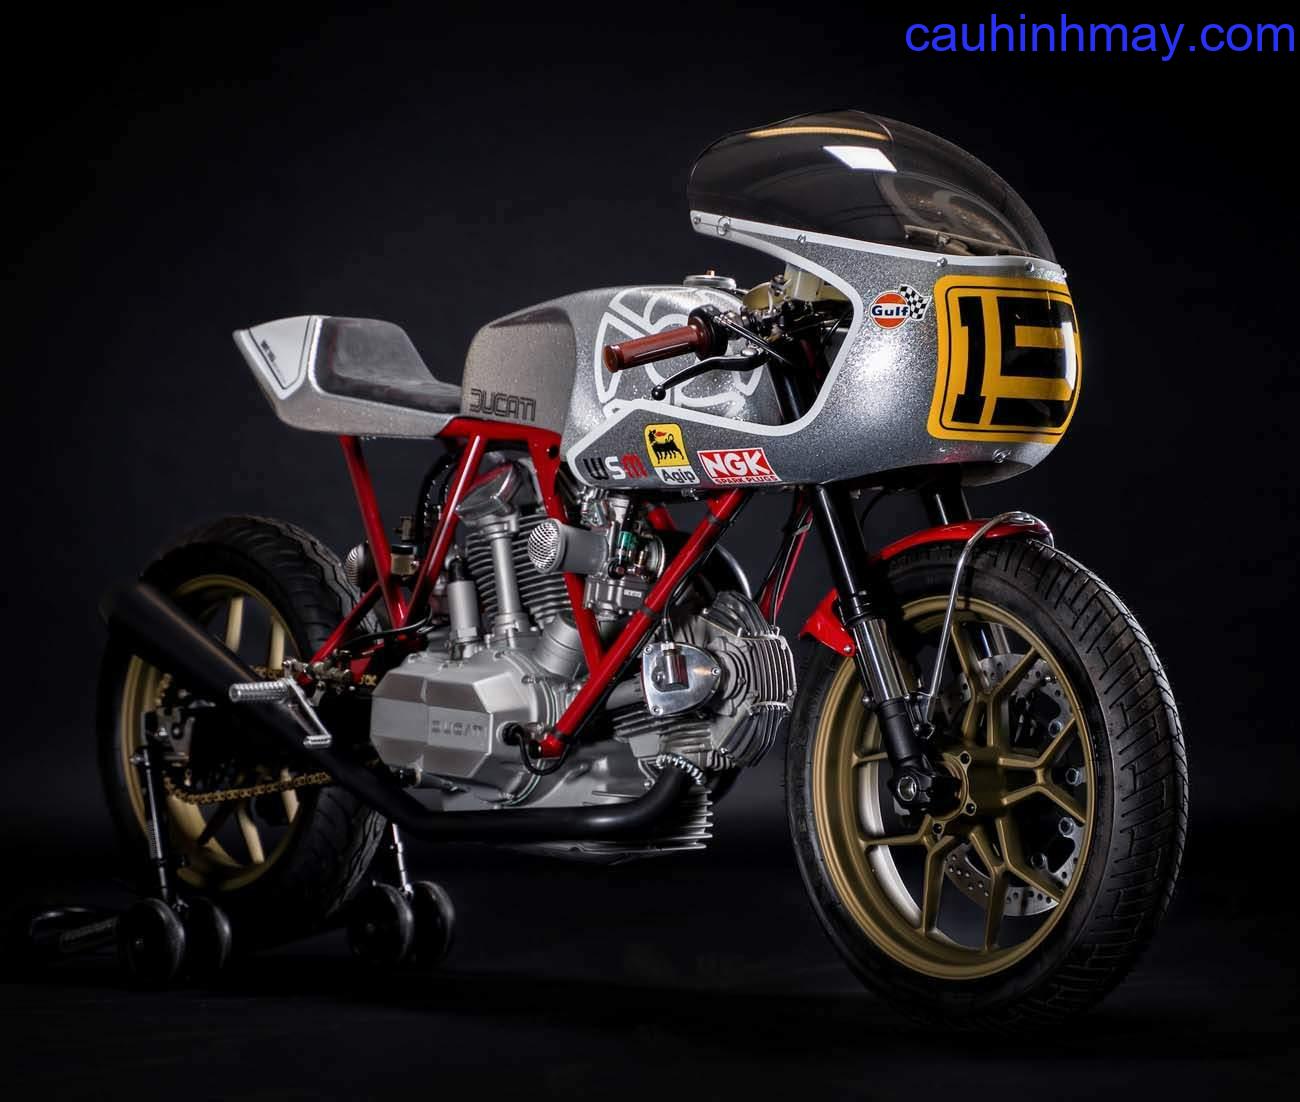 DUCATI SQUARE-CASE BEVEL RACER BEDEVELED BY WALT SIEGL - cauhinhmay.com